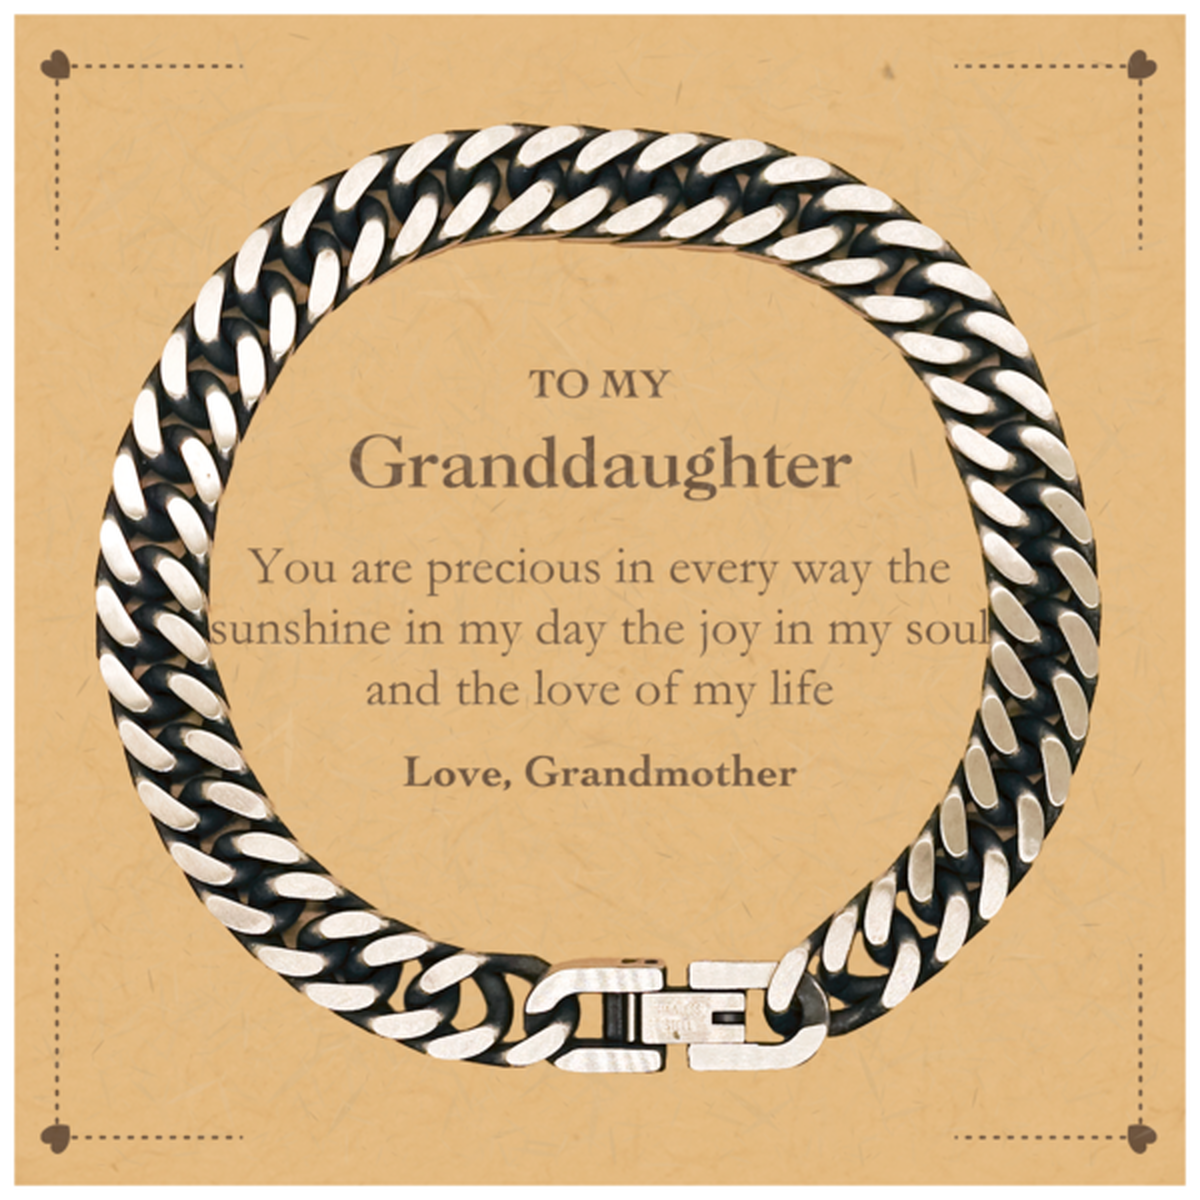 Graduation Gifts for Granddaughter Cuban Link Chain Bracelet Present from Grandmother, Christmas Granddaughter Birthday Gifts Granddaughter You are precious in every way the sunshine in my day. Love, Grandmother